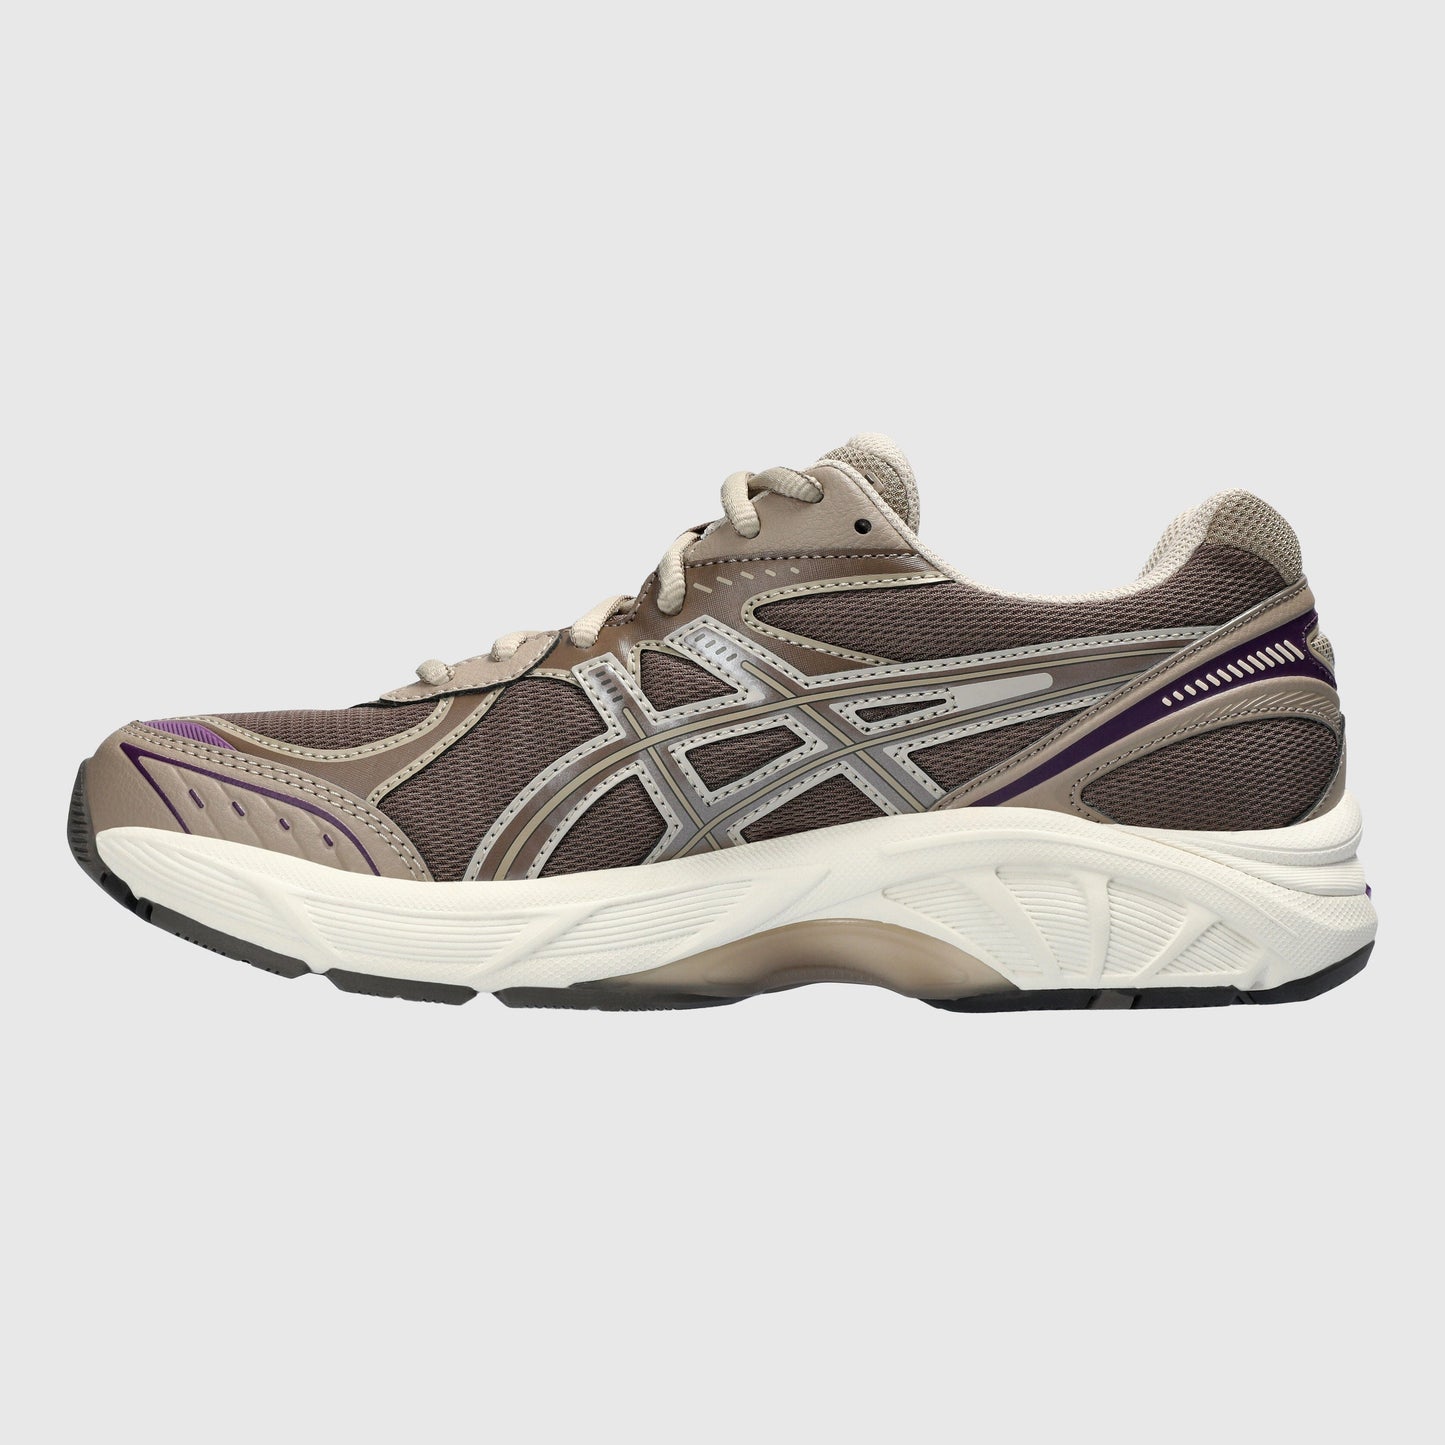 Asics GT-2160 Sneakers - Dark Taupe / Taupe Grey Sneakers Asics 